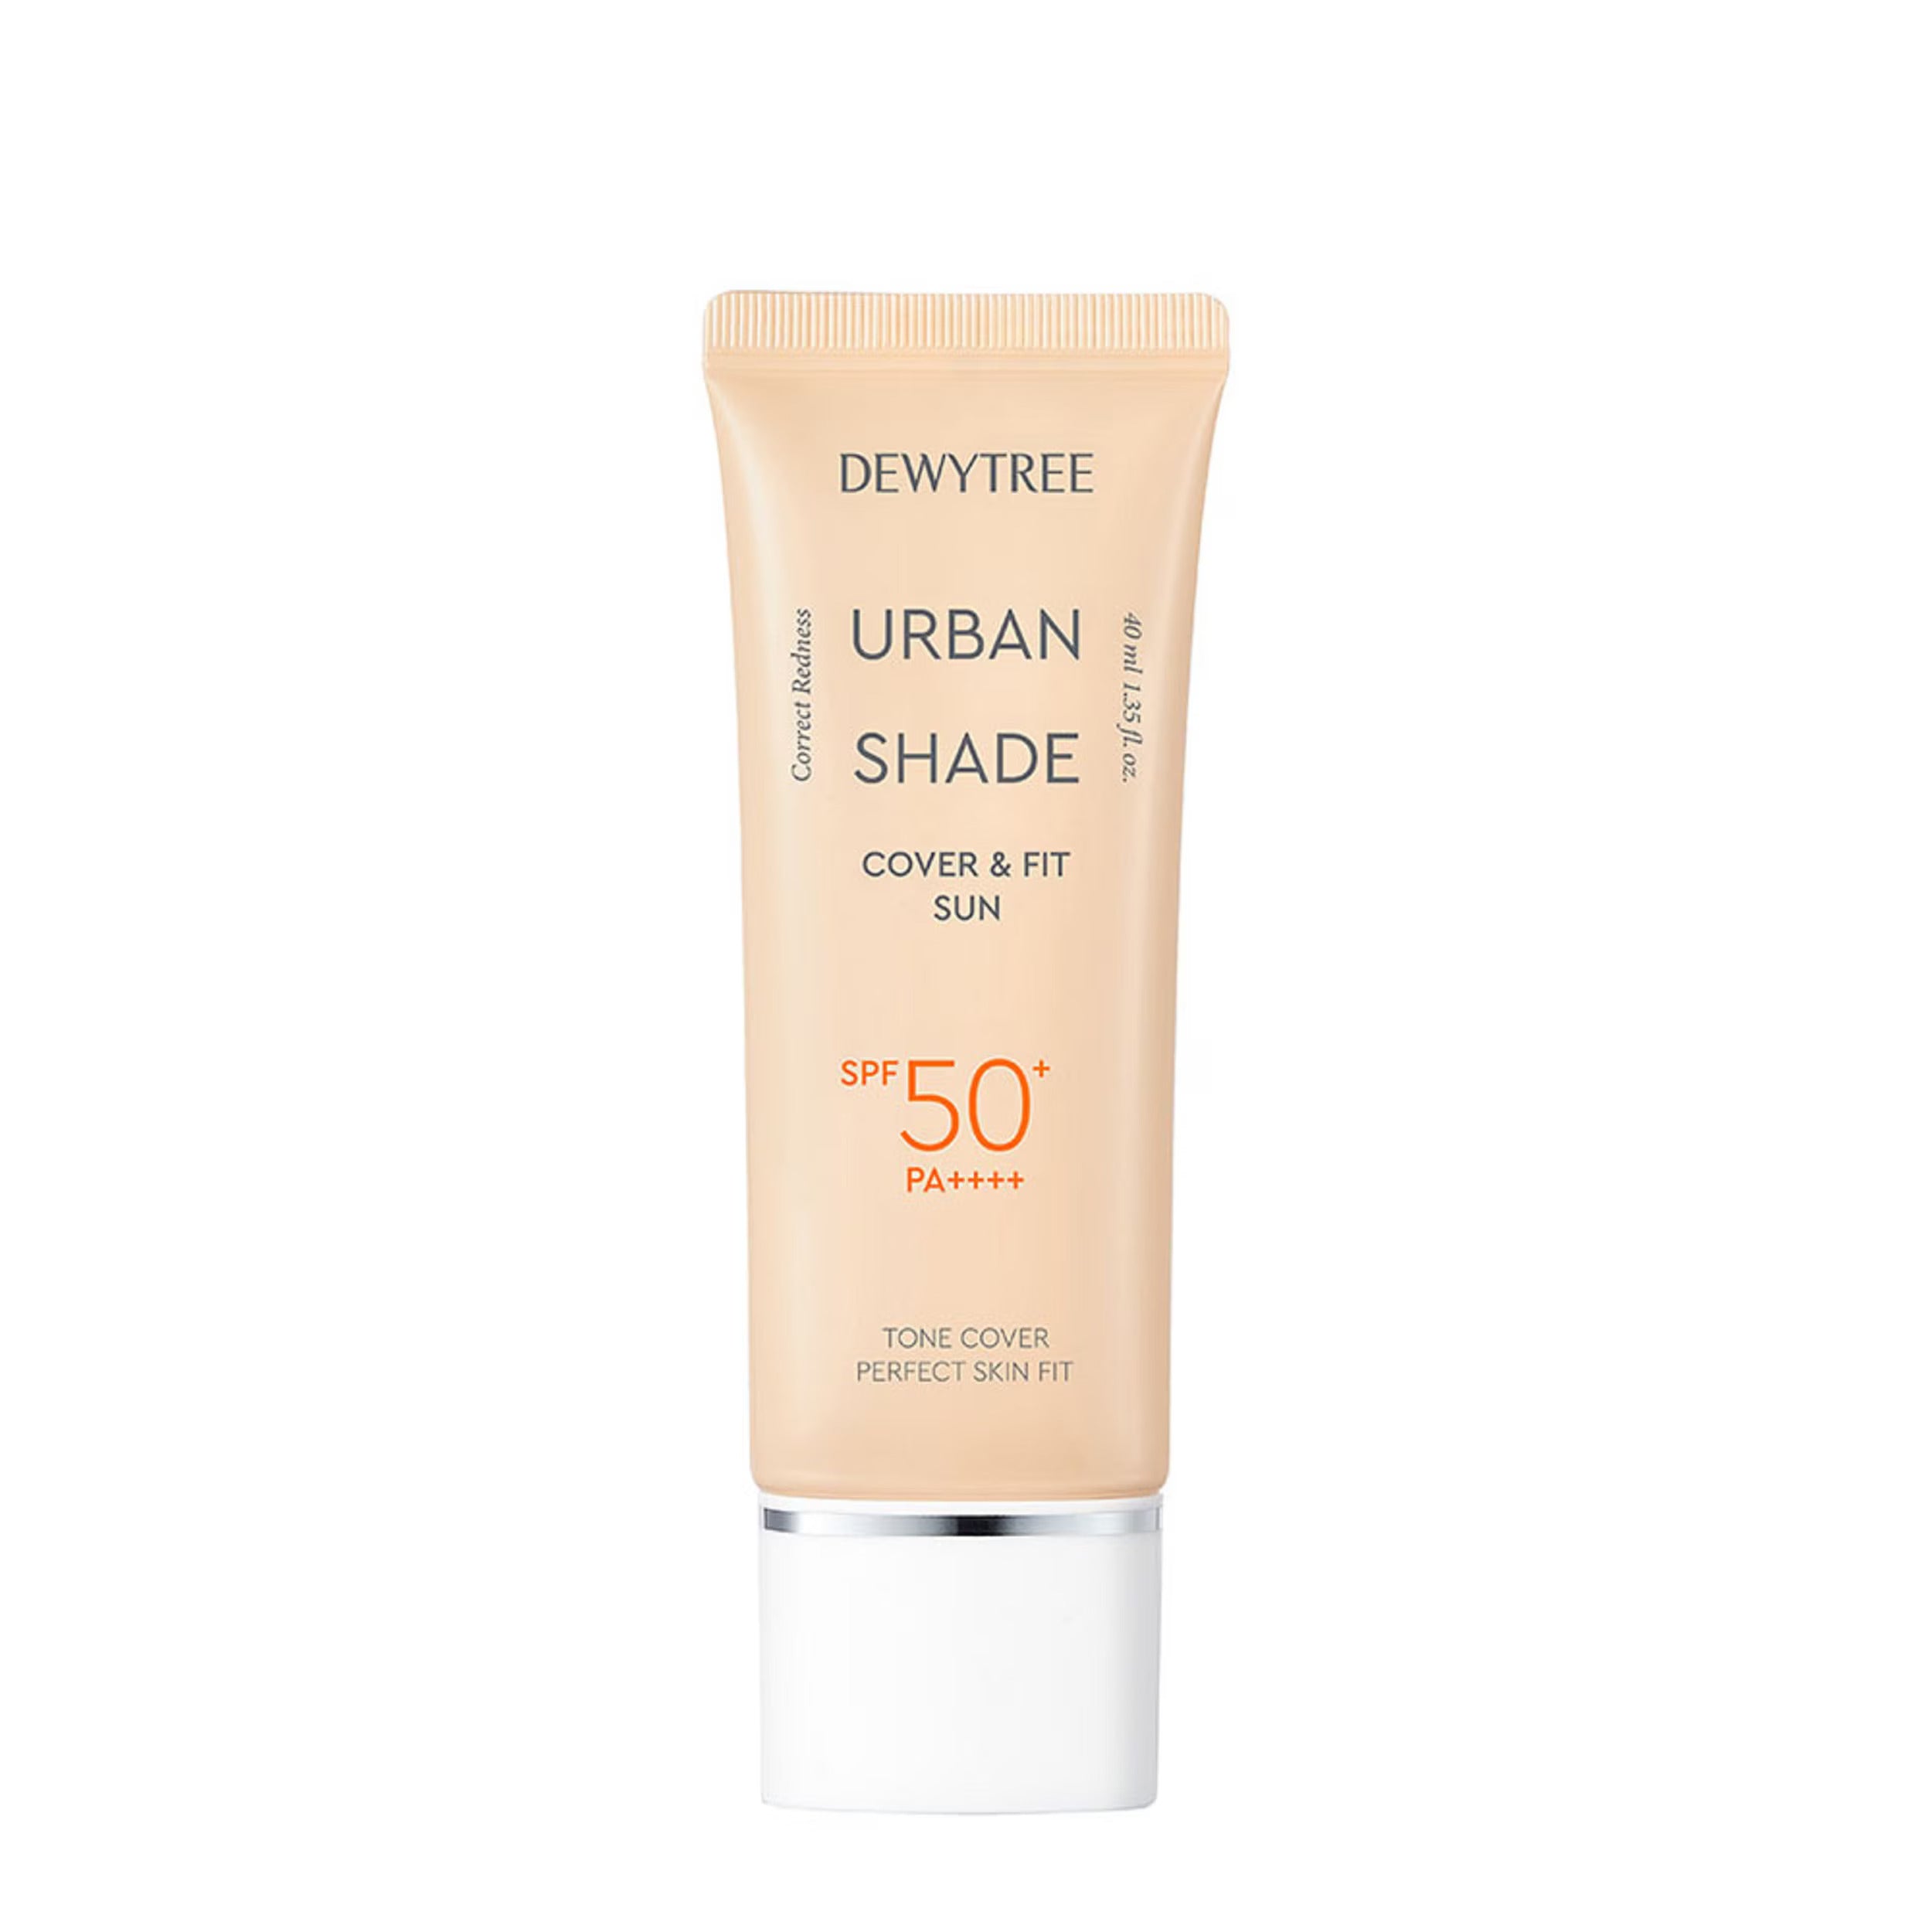 (Matthew) Dewytree Urban Shade Cover And Fit Sunscreen SPF 50+ PA++++ 40ml - DODOSKIN